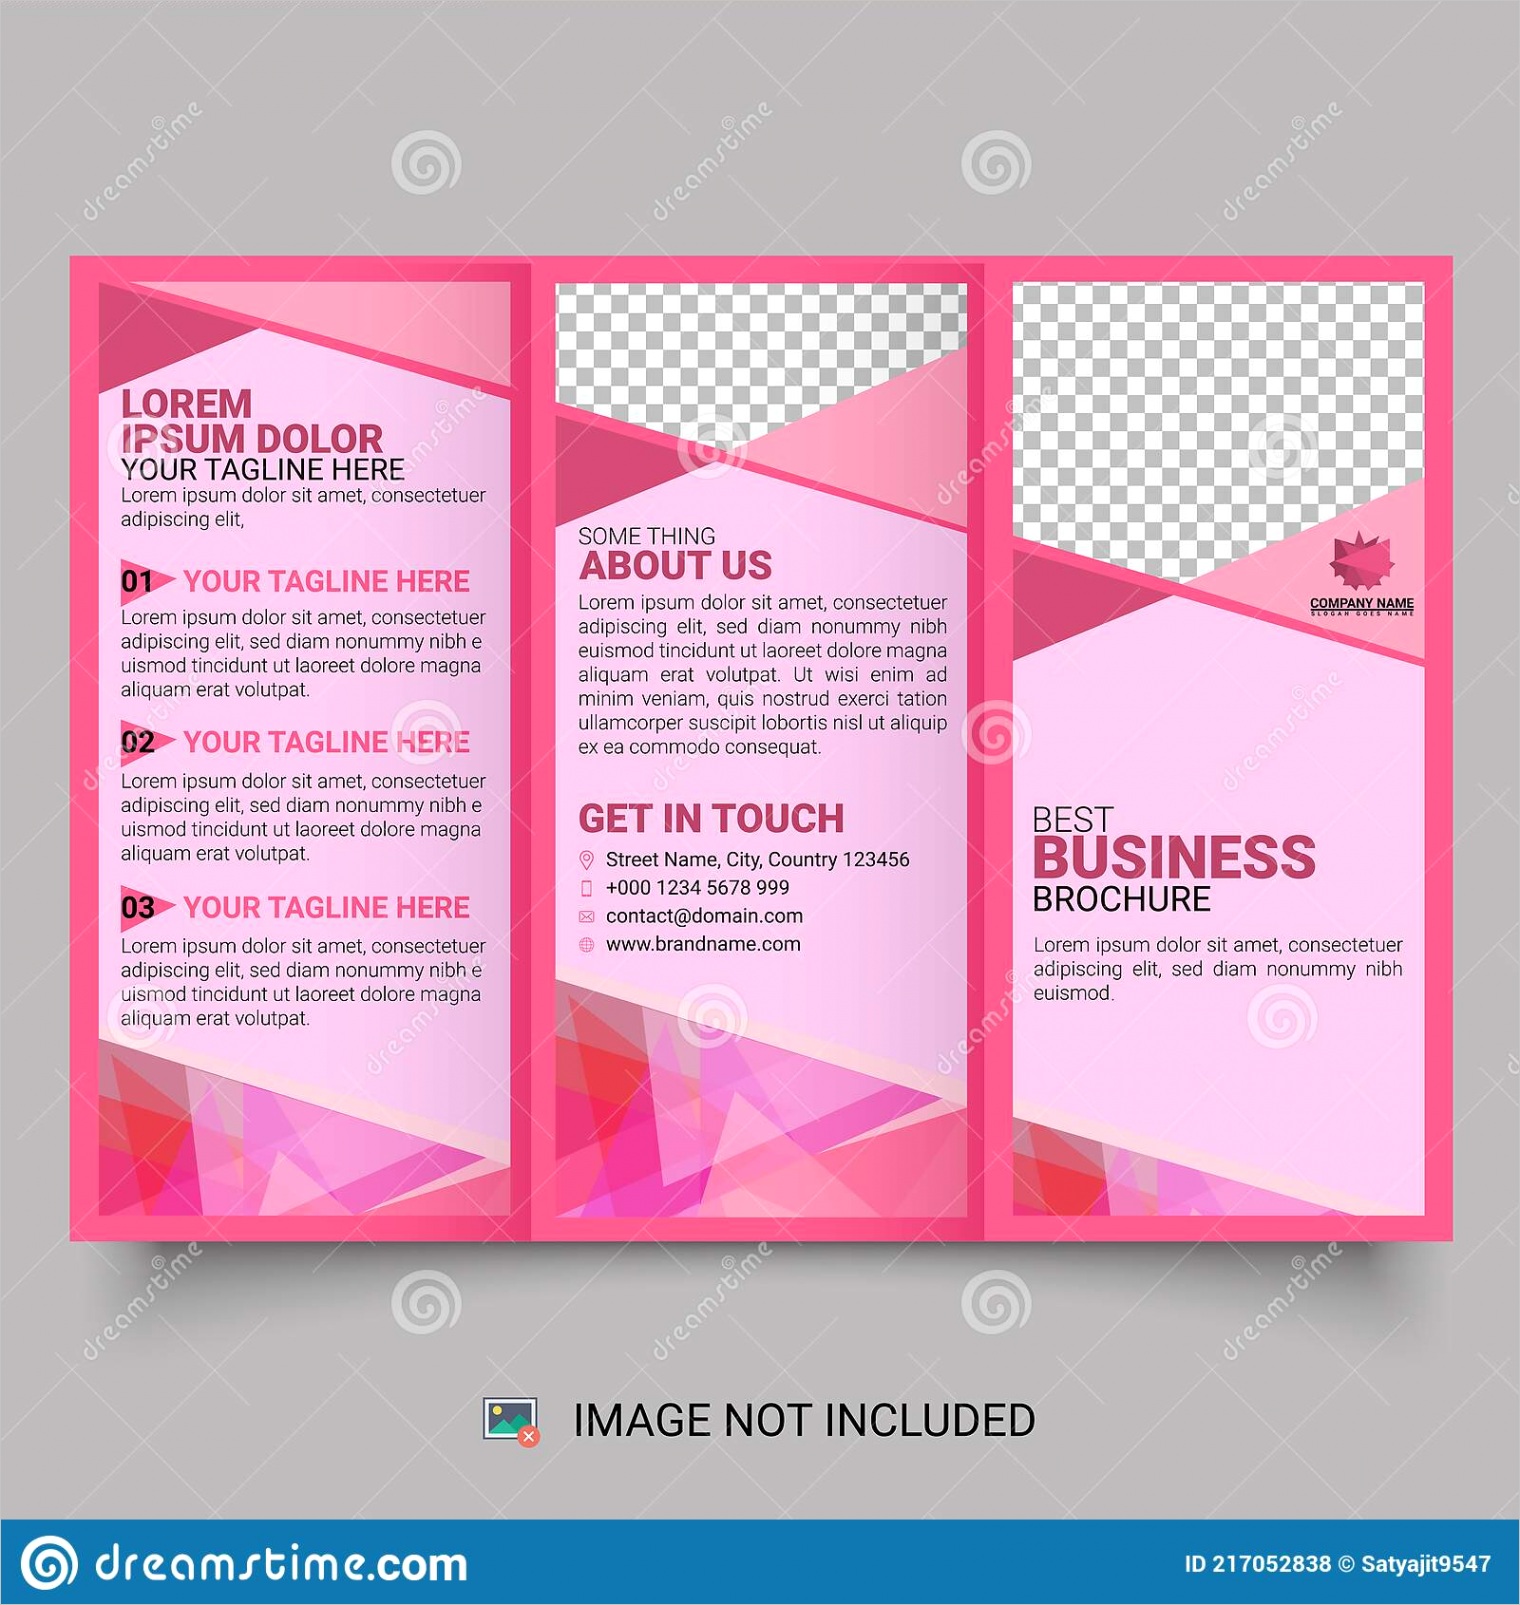 best business brochure templates free word pany content samples pdf editable design image